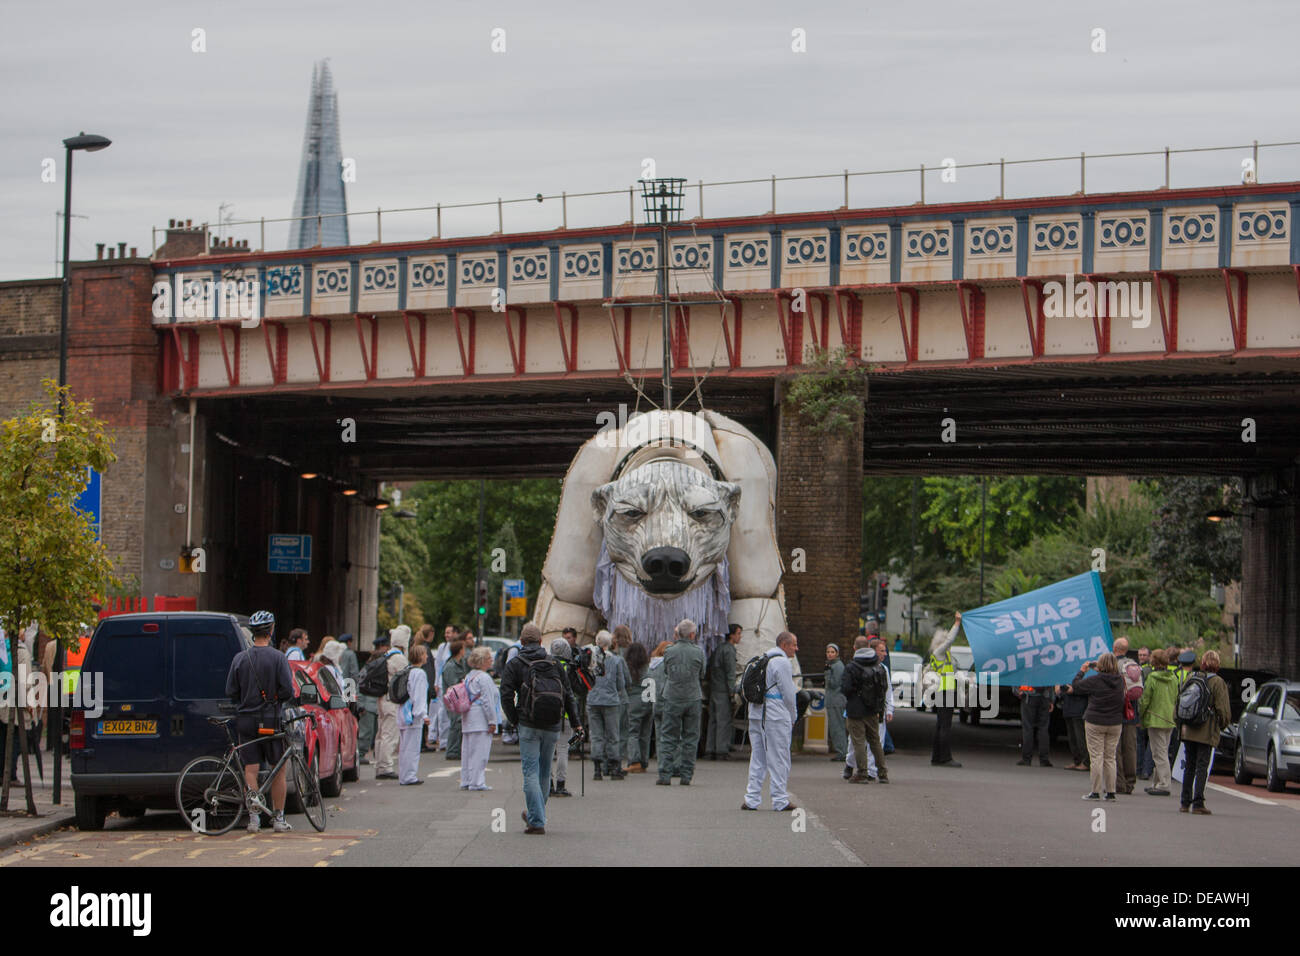 London, UK. 15 September 2013. Greenpeace take world's largest polar bear puppet , Aurora, in parade from Lambeth Road to Shell Oil's London HQ.  Credit:  martyn wheatley/Alamy Live News Stock Photo